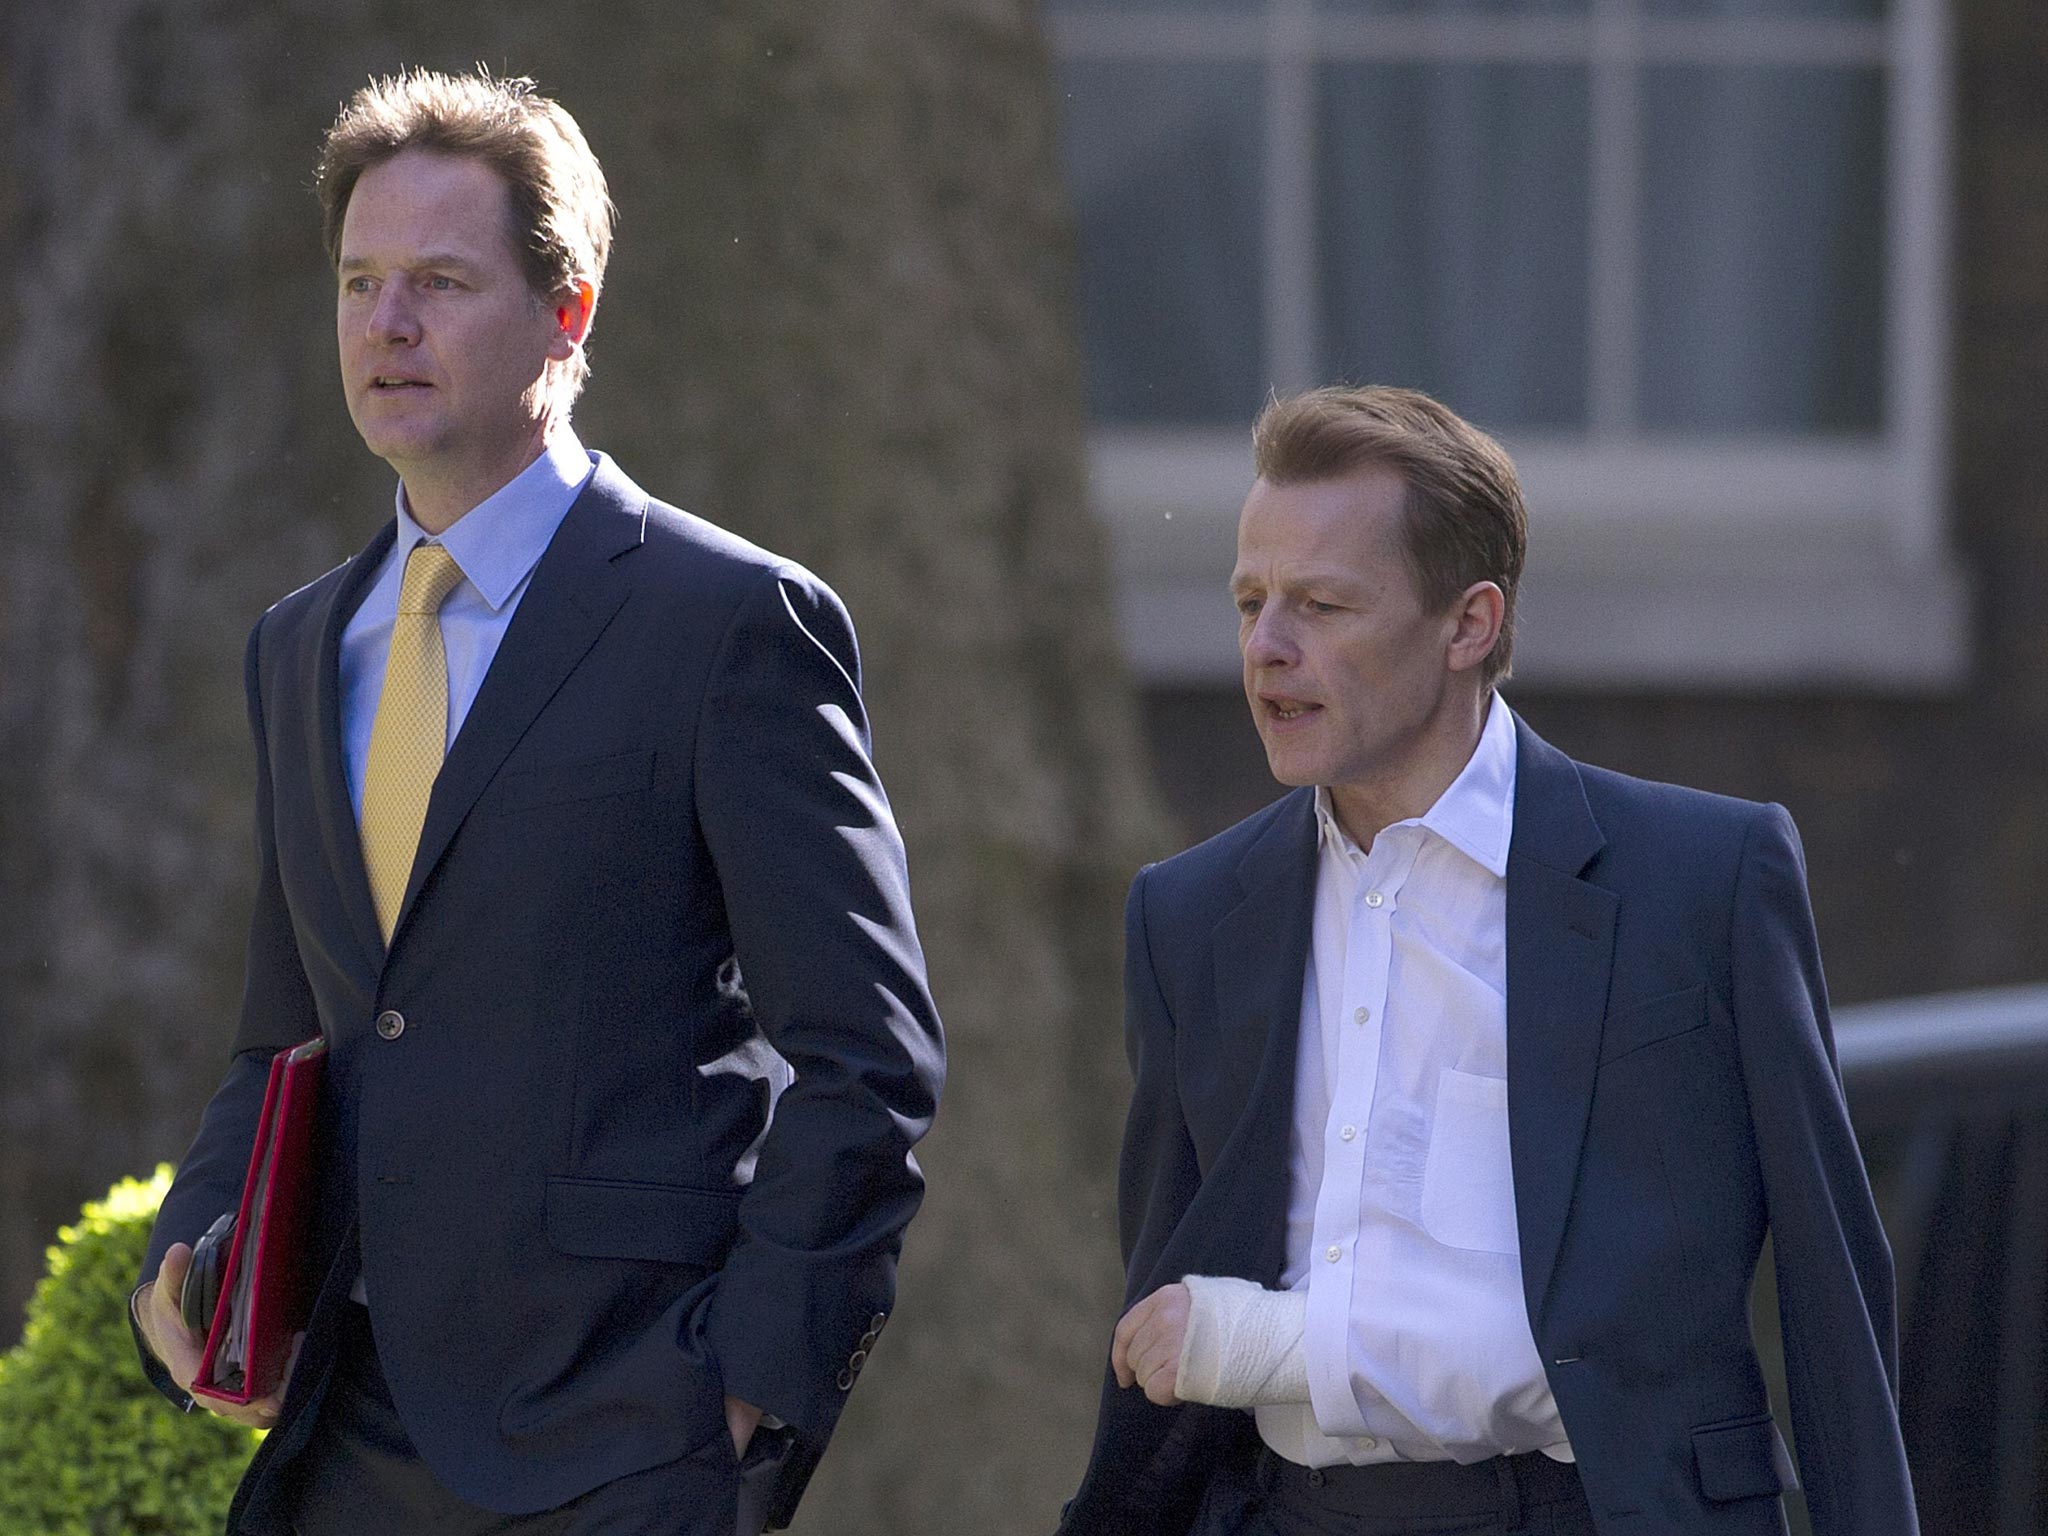 Nick Clegg and David Laws have clashed with their
Conservative partners